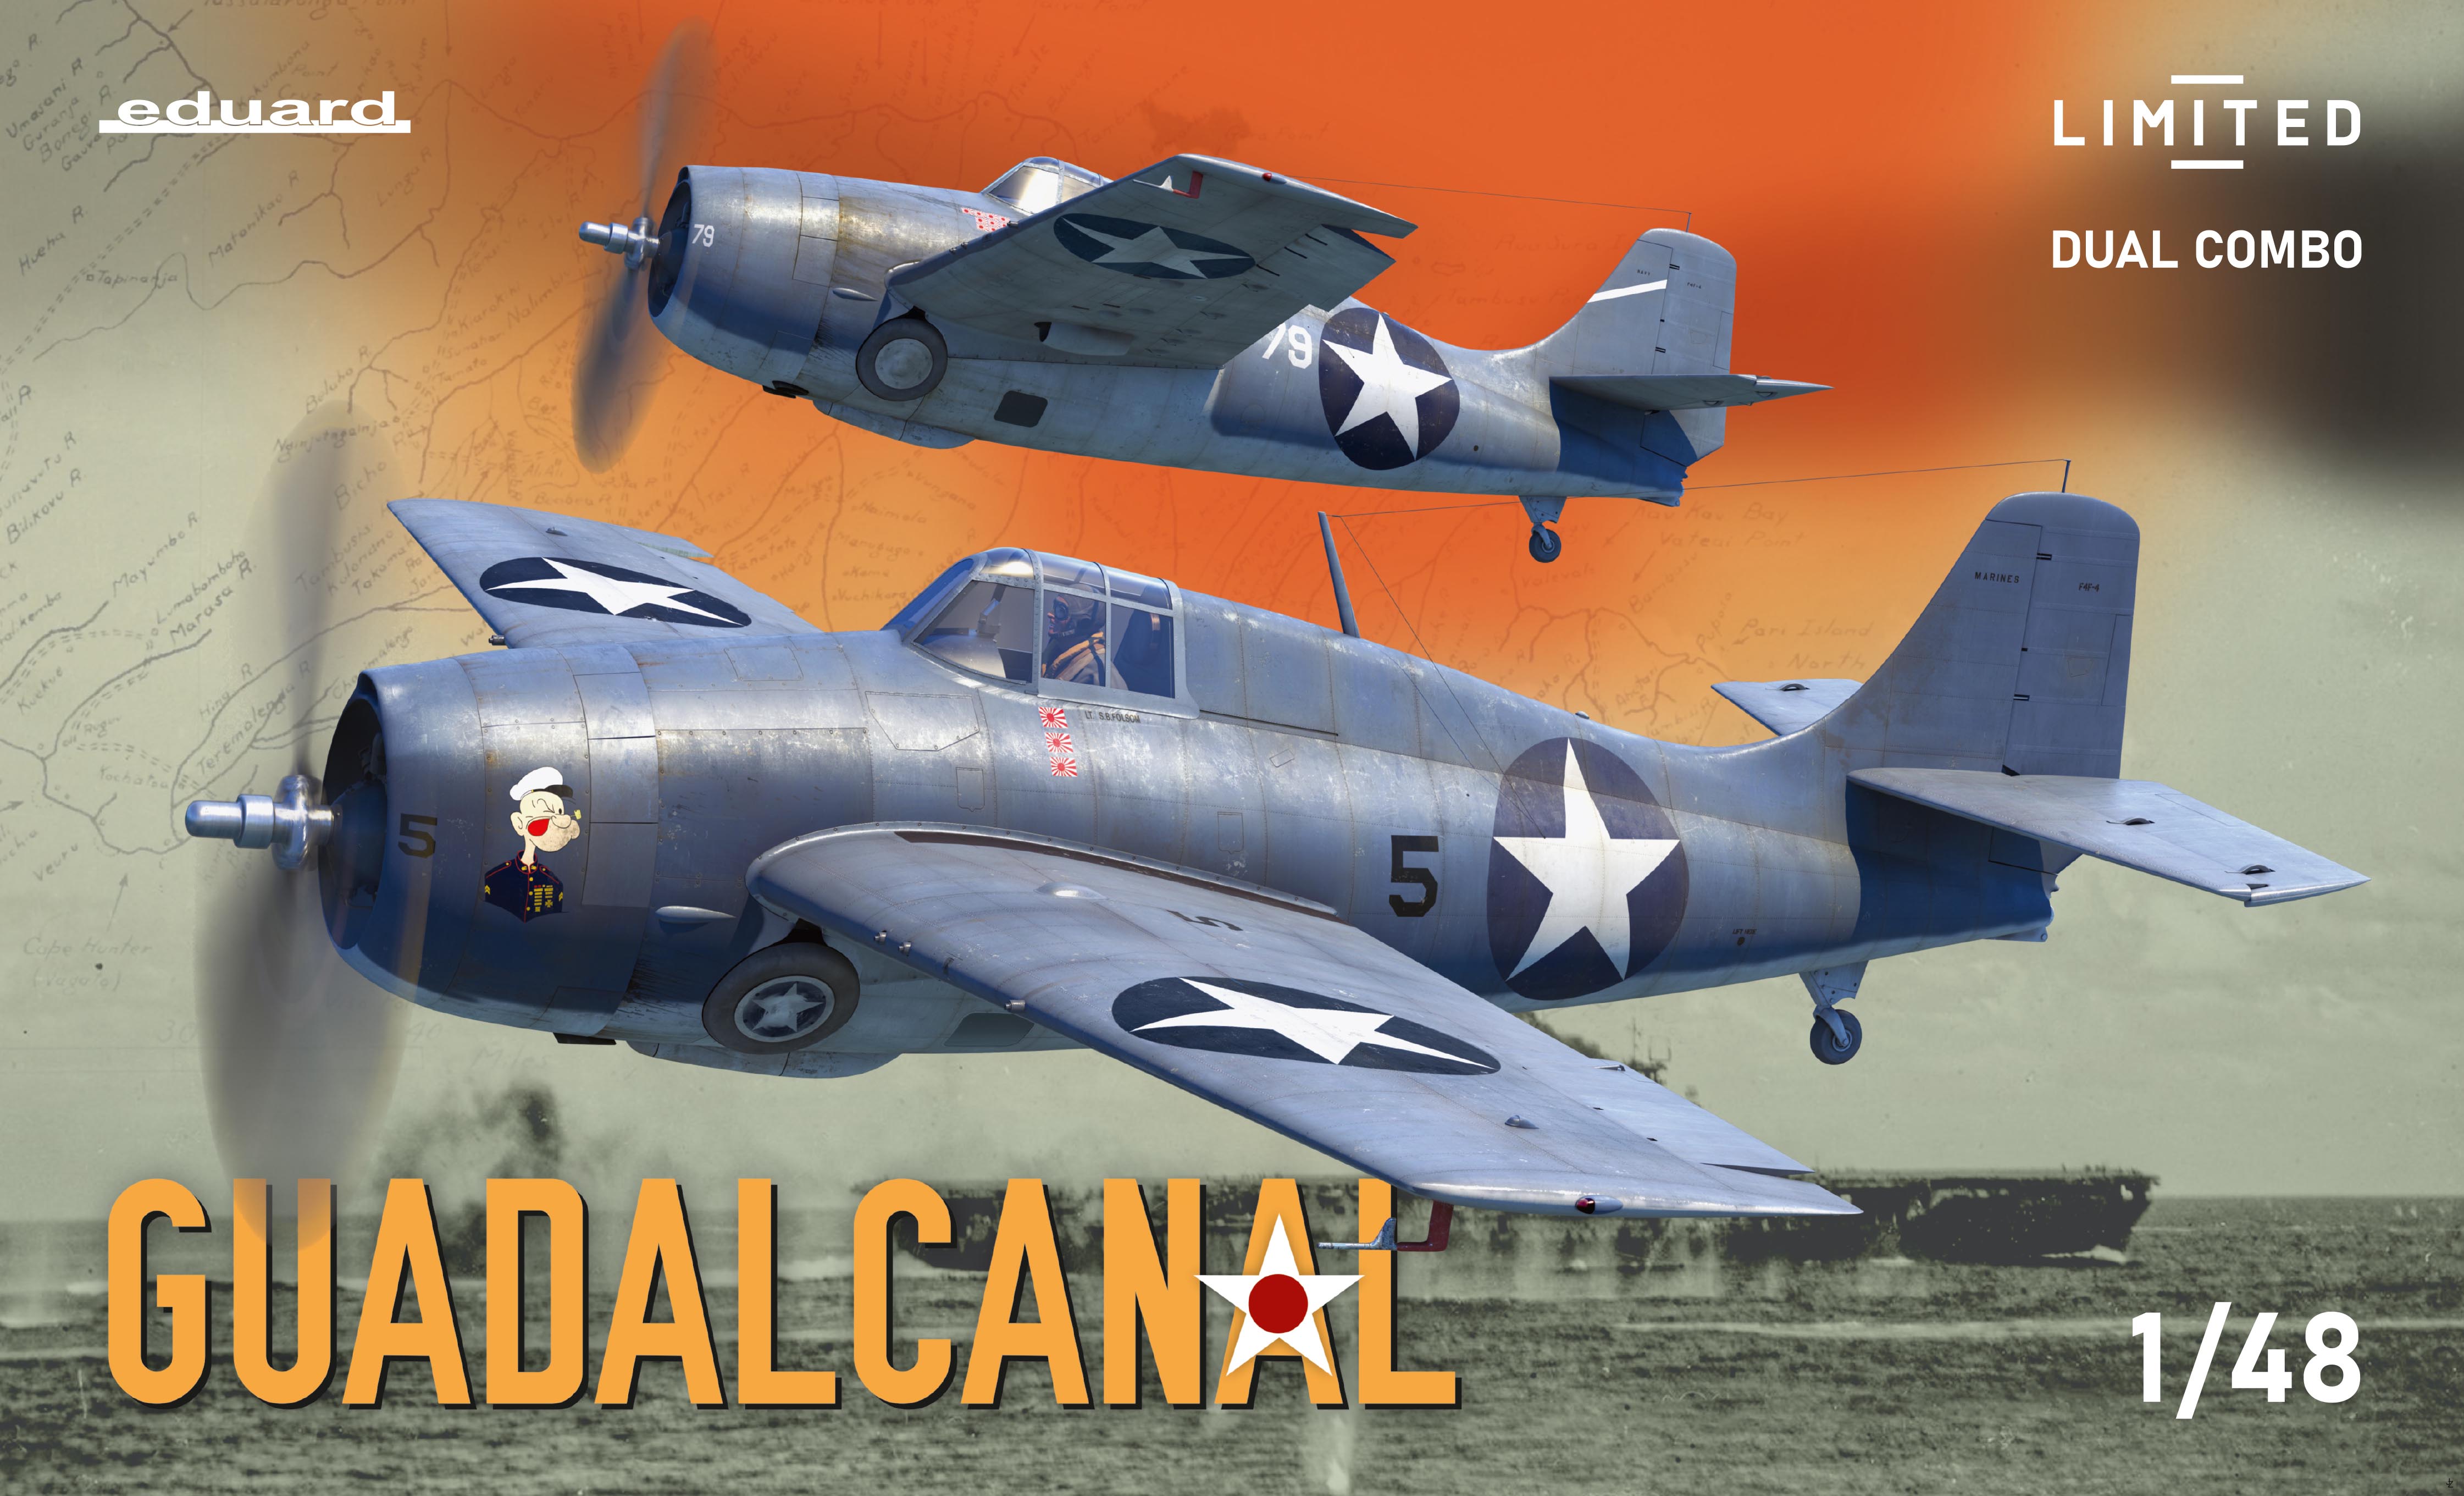 Fotografie 1/48 GUADALCANAL (F4F-4 Wildcat early & late) - (Limited edition - Dual Combo)